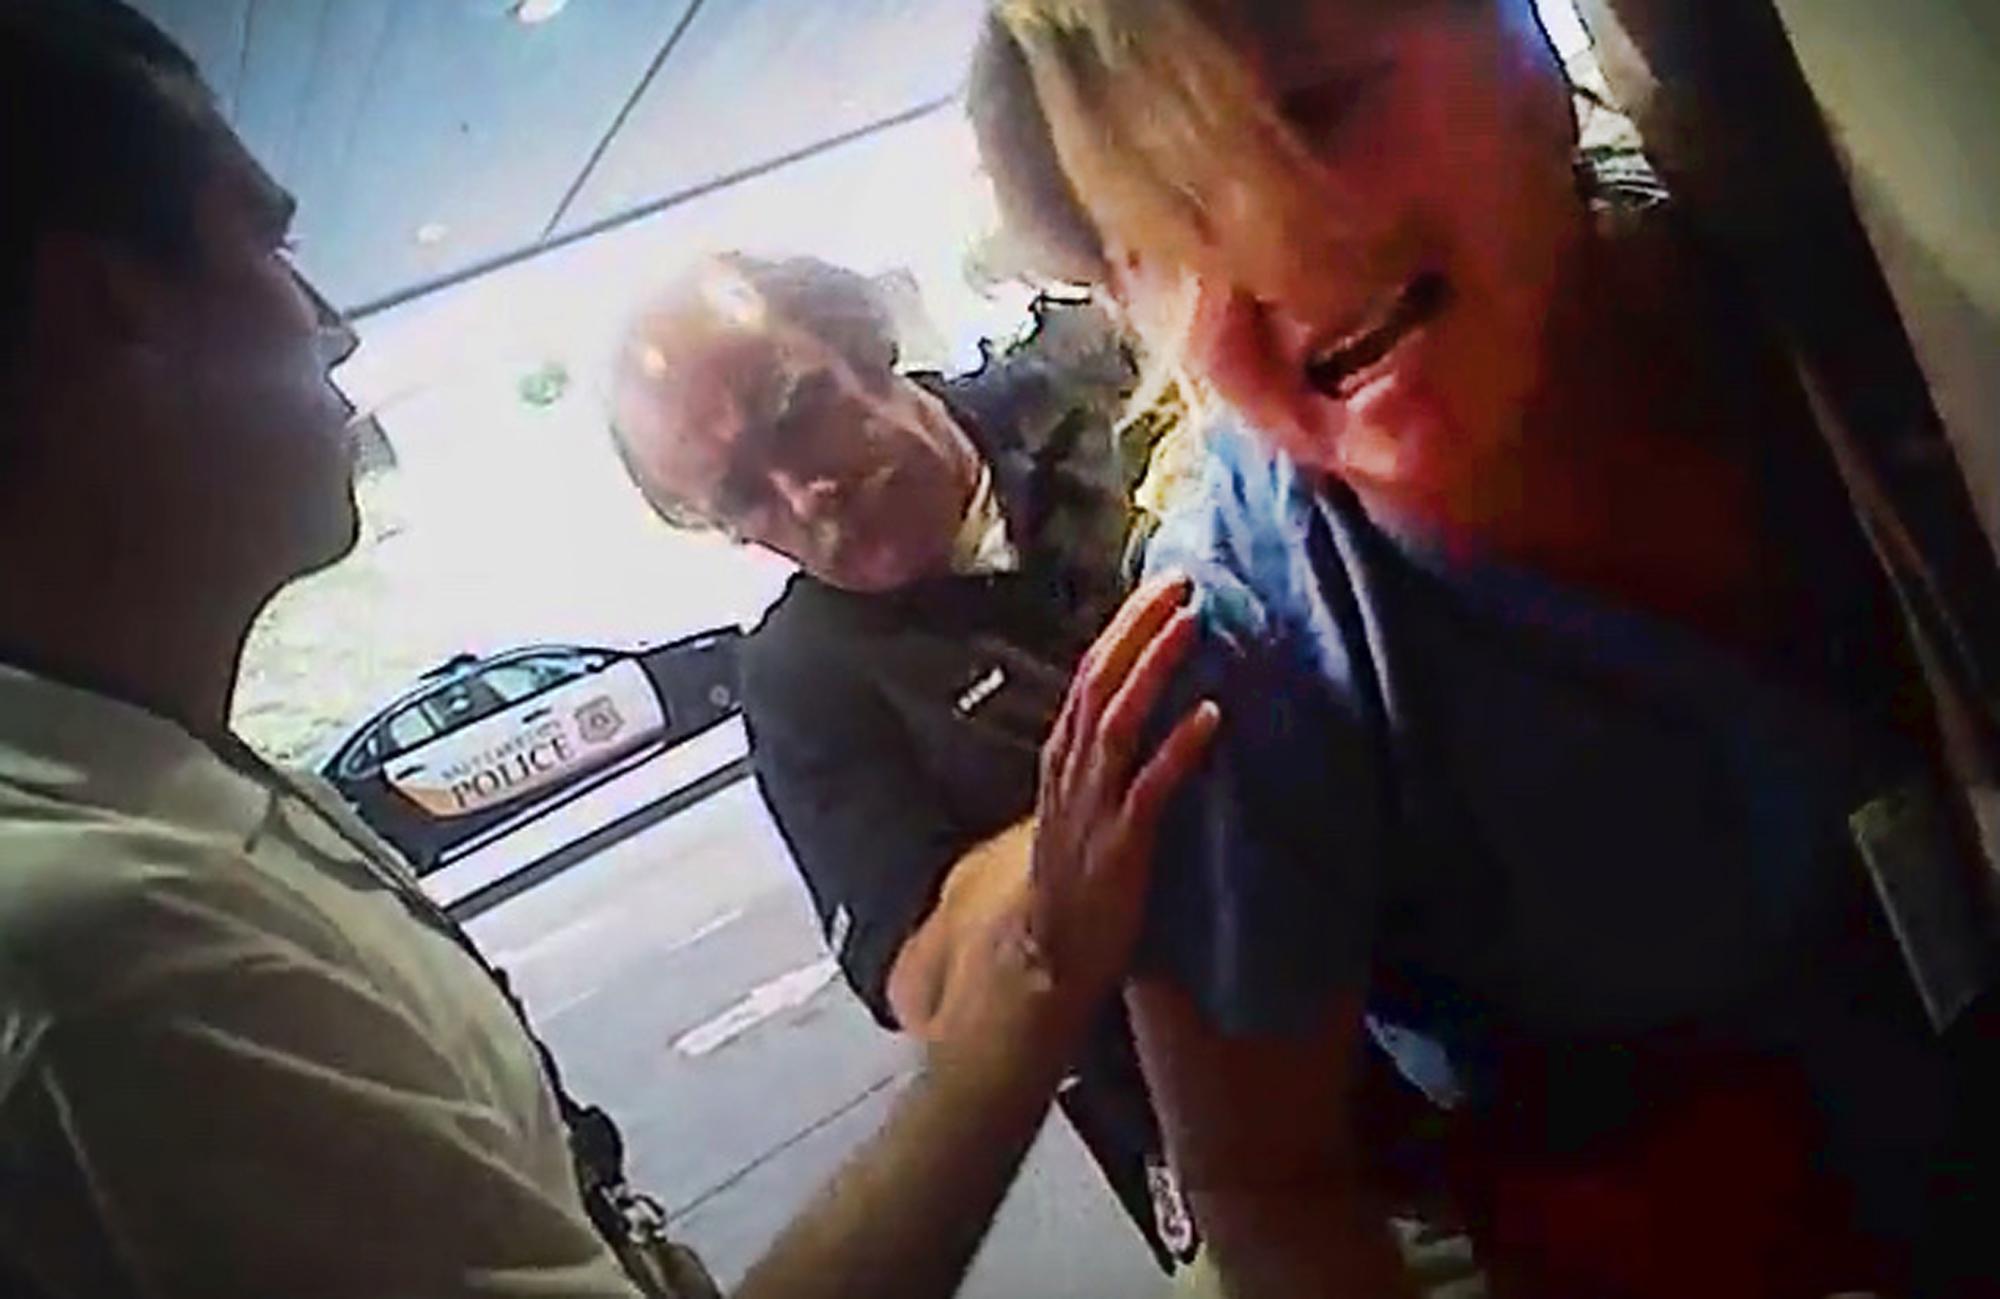 Nurse arrested for denying blood test ‘This cop bullied me’ The